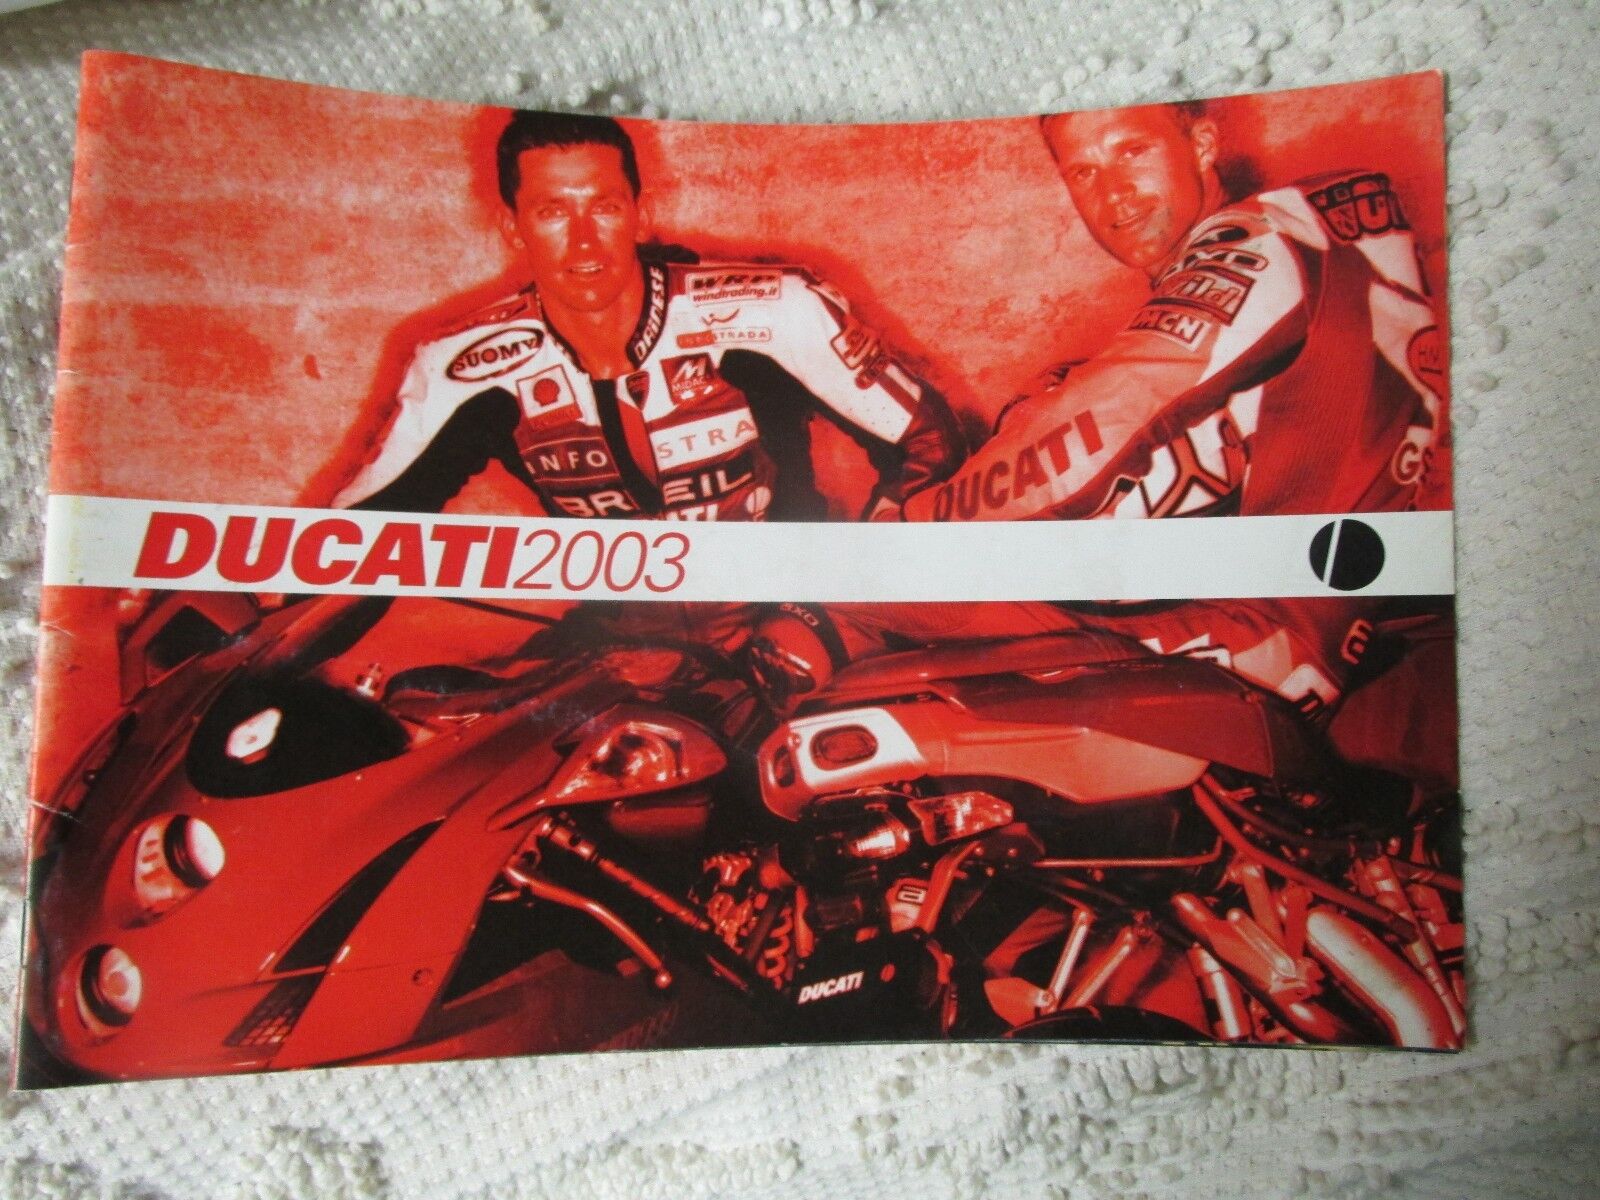 DUCATI MOTORCYCLE SALES BROCHURE  YEAR 2003 WITH DEALER PRICE CARD